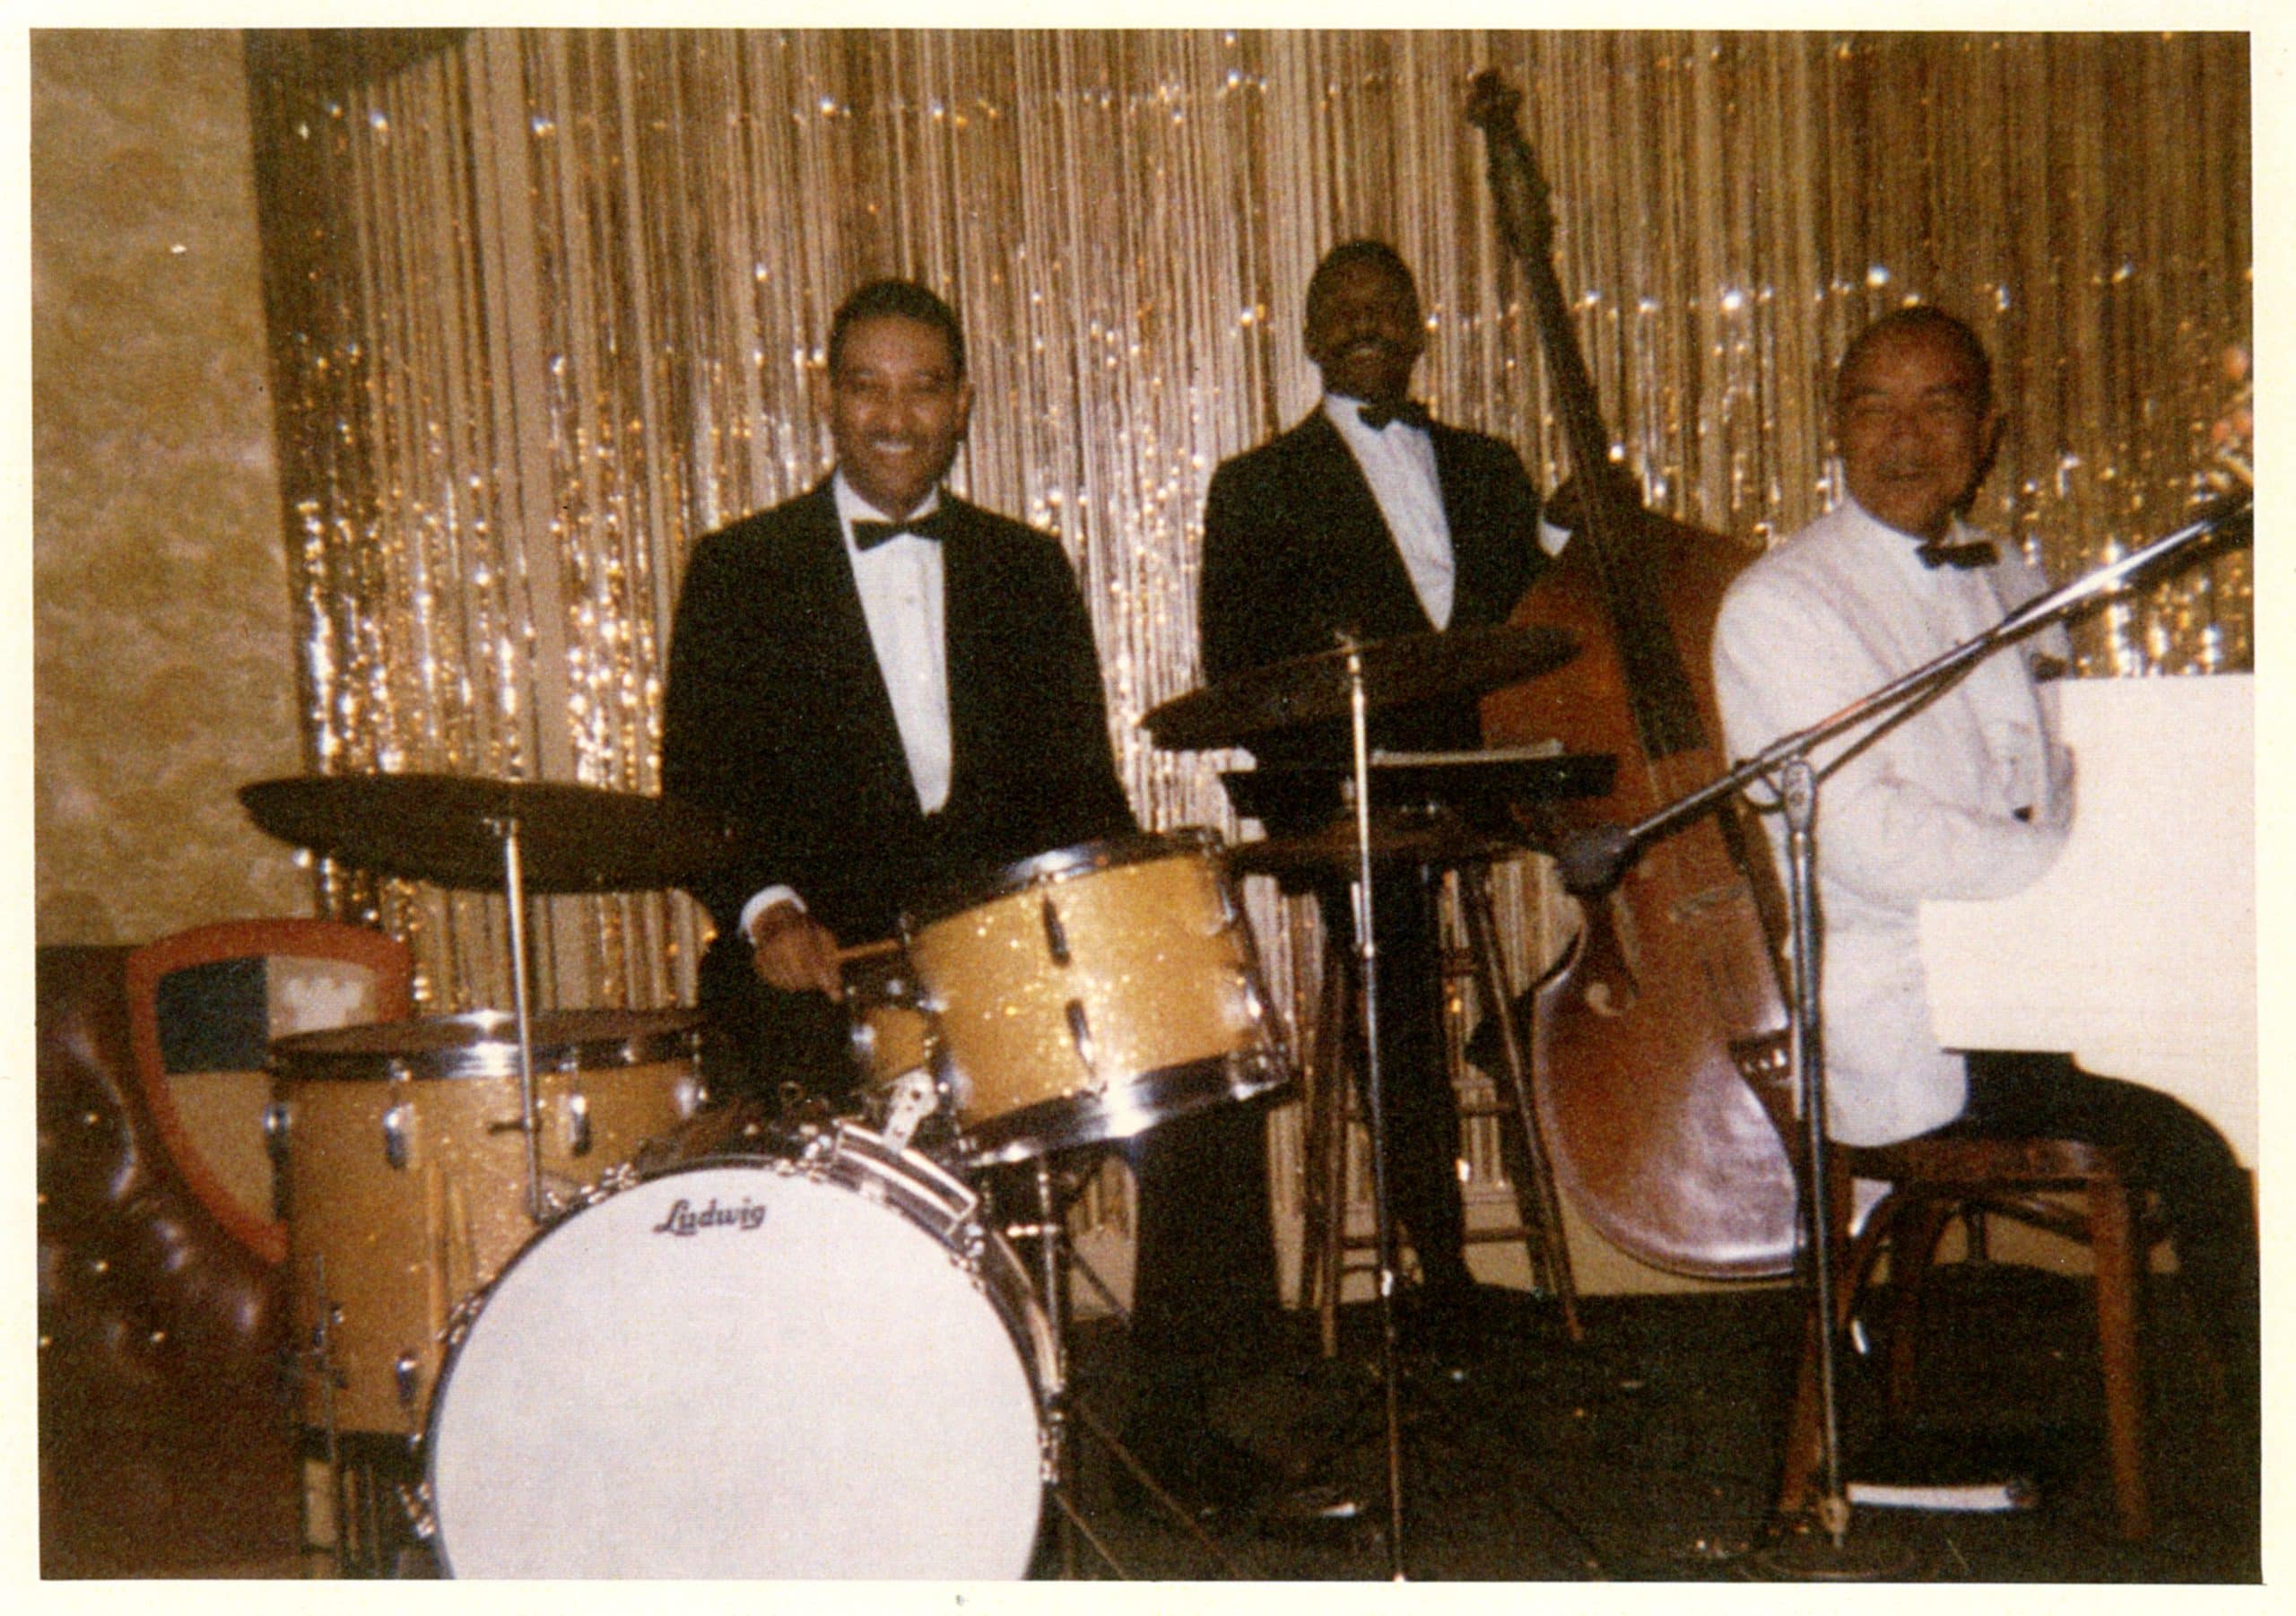 Photograph of Earl Watkins drumming with band at the Claremont Hotel Terrace Room